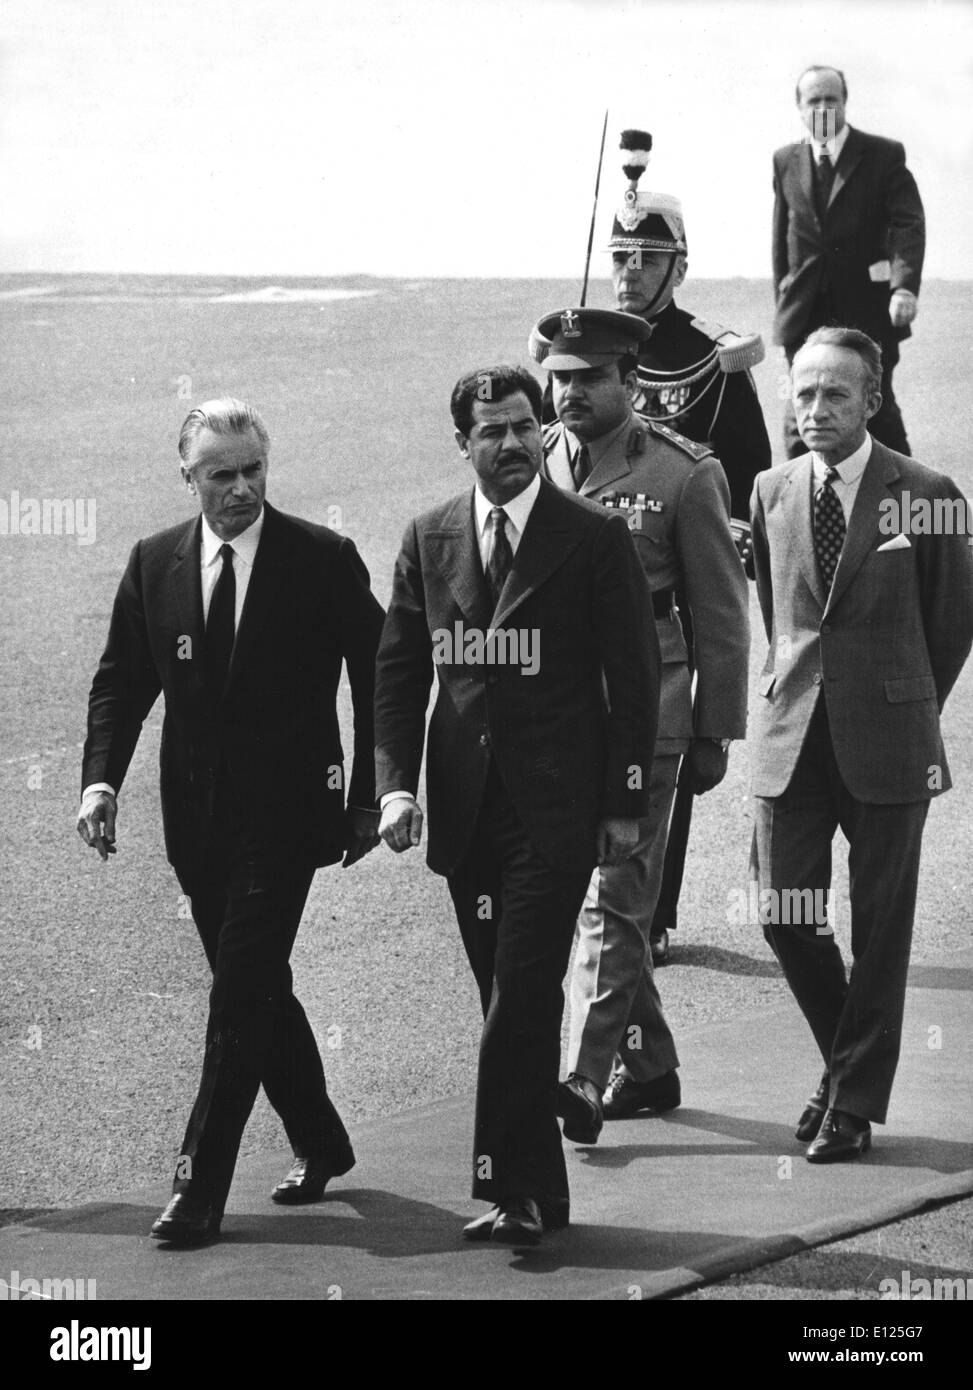 Dec 14, 2003; Paris, FRANCE; (FILE PHOTO) Saddam Hussein Captured by US forces today December 14, 2003 in Tikrit, Iraq. Pictured: June 14th 1972. Former Iraqi President SADDAM HUSSEIN Picture shows the then Iraqi Vice-President during an official visit to Paris. On the left is JAQUES CHABAN-DELMAS.. (Credit Image: KEYSTONE Pictures USA/ZUMAPRESS.com) Stock Photo